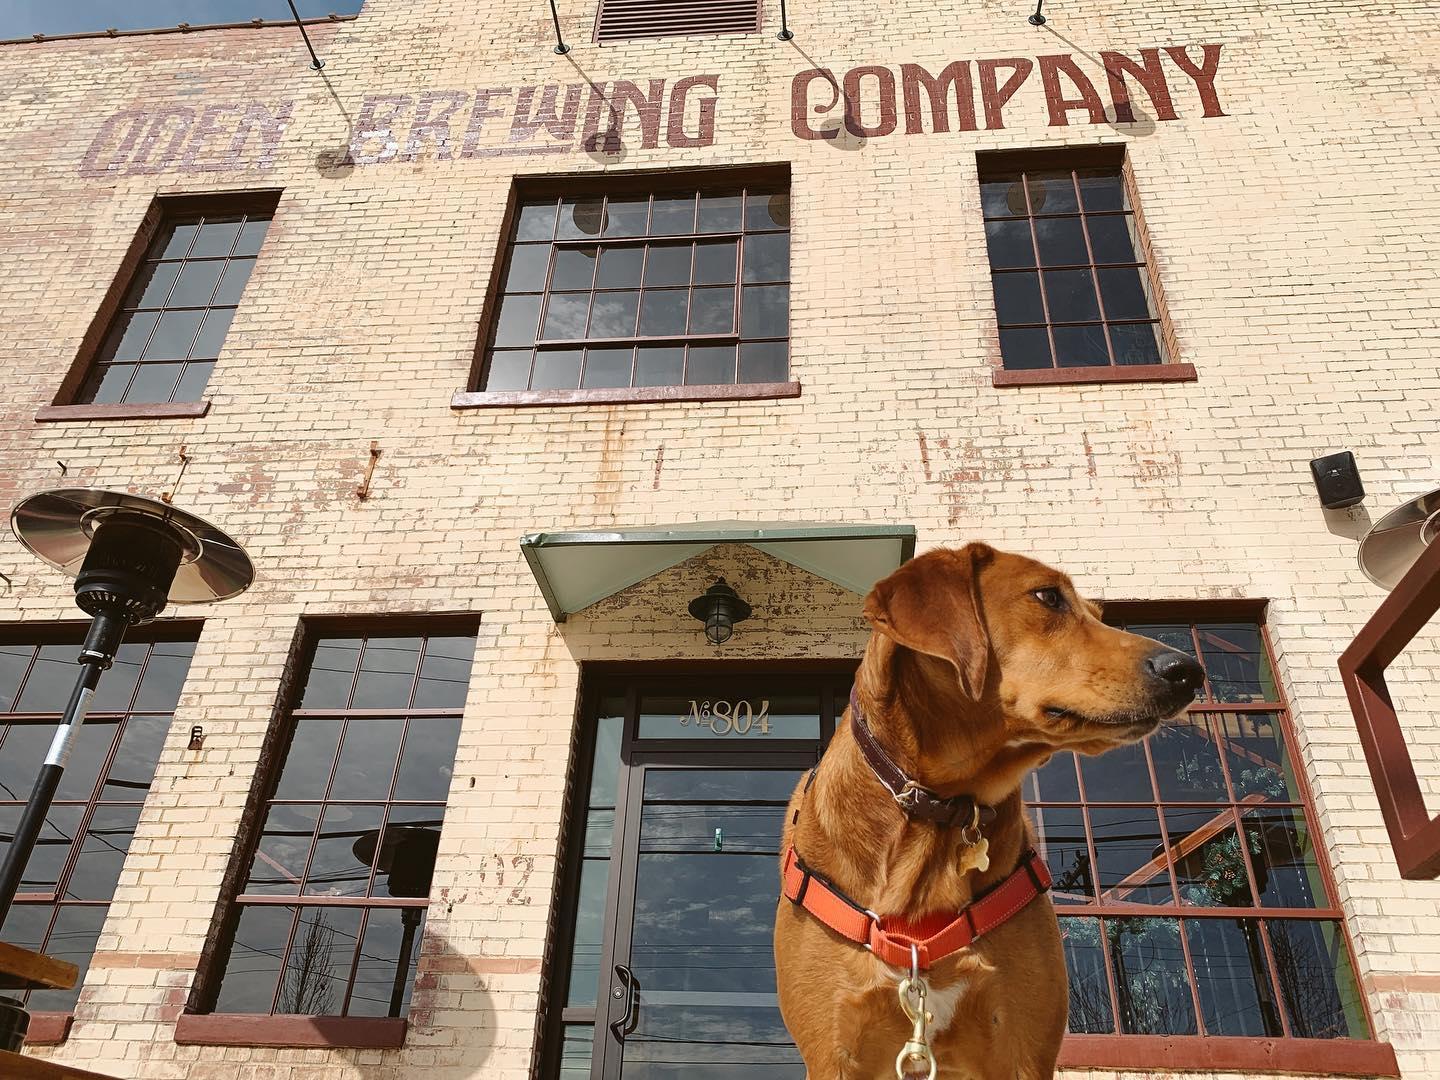 Pet Friendly Oden Brewing Company